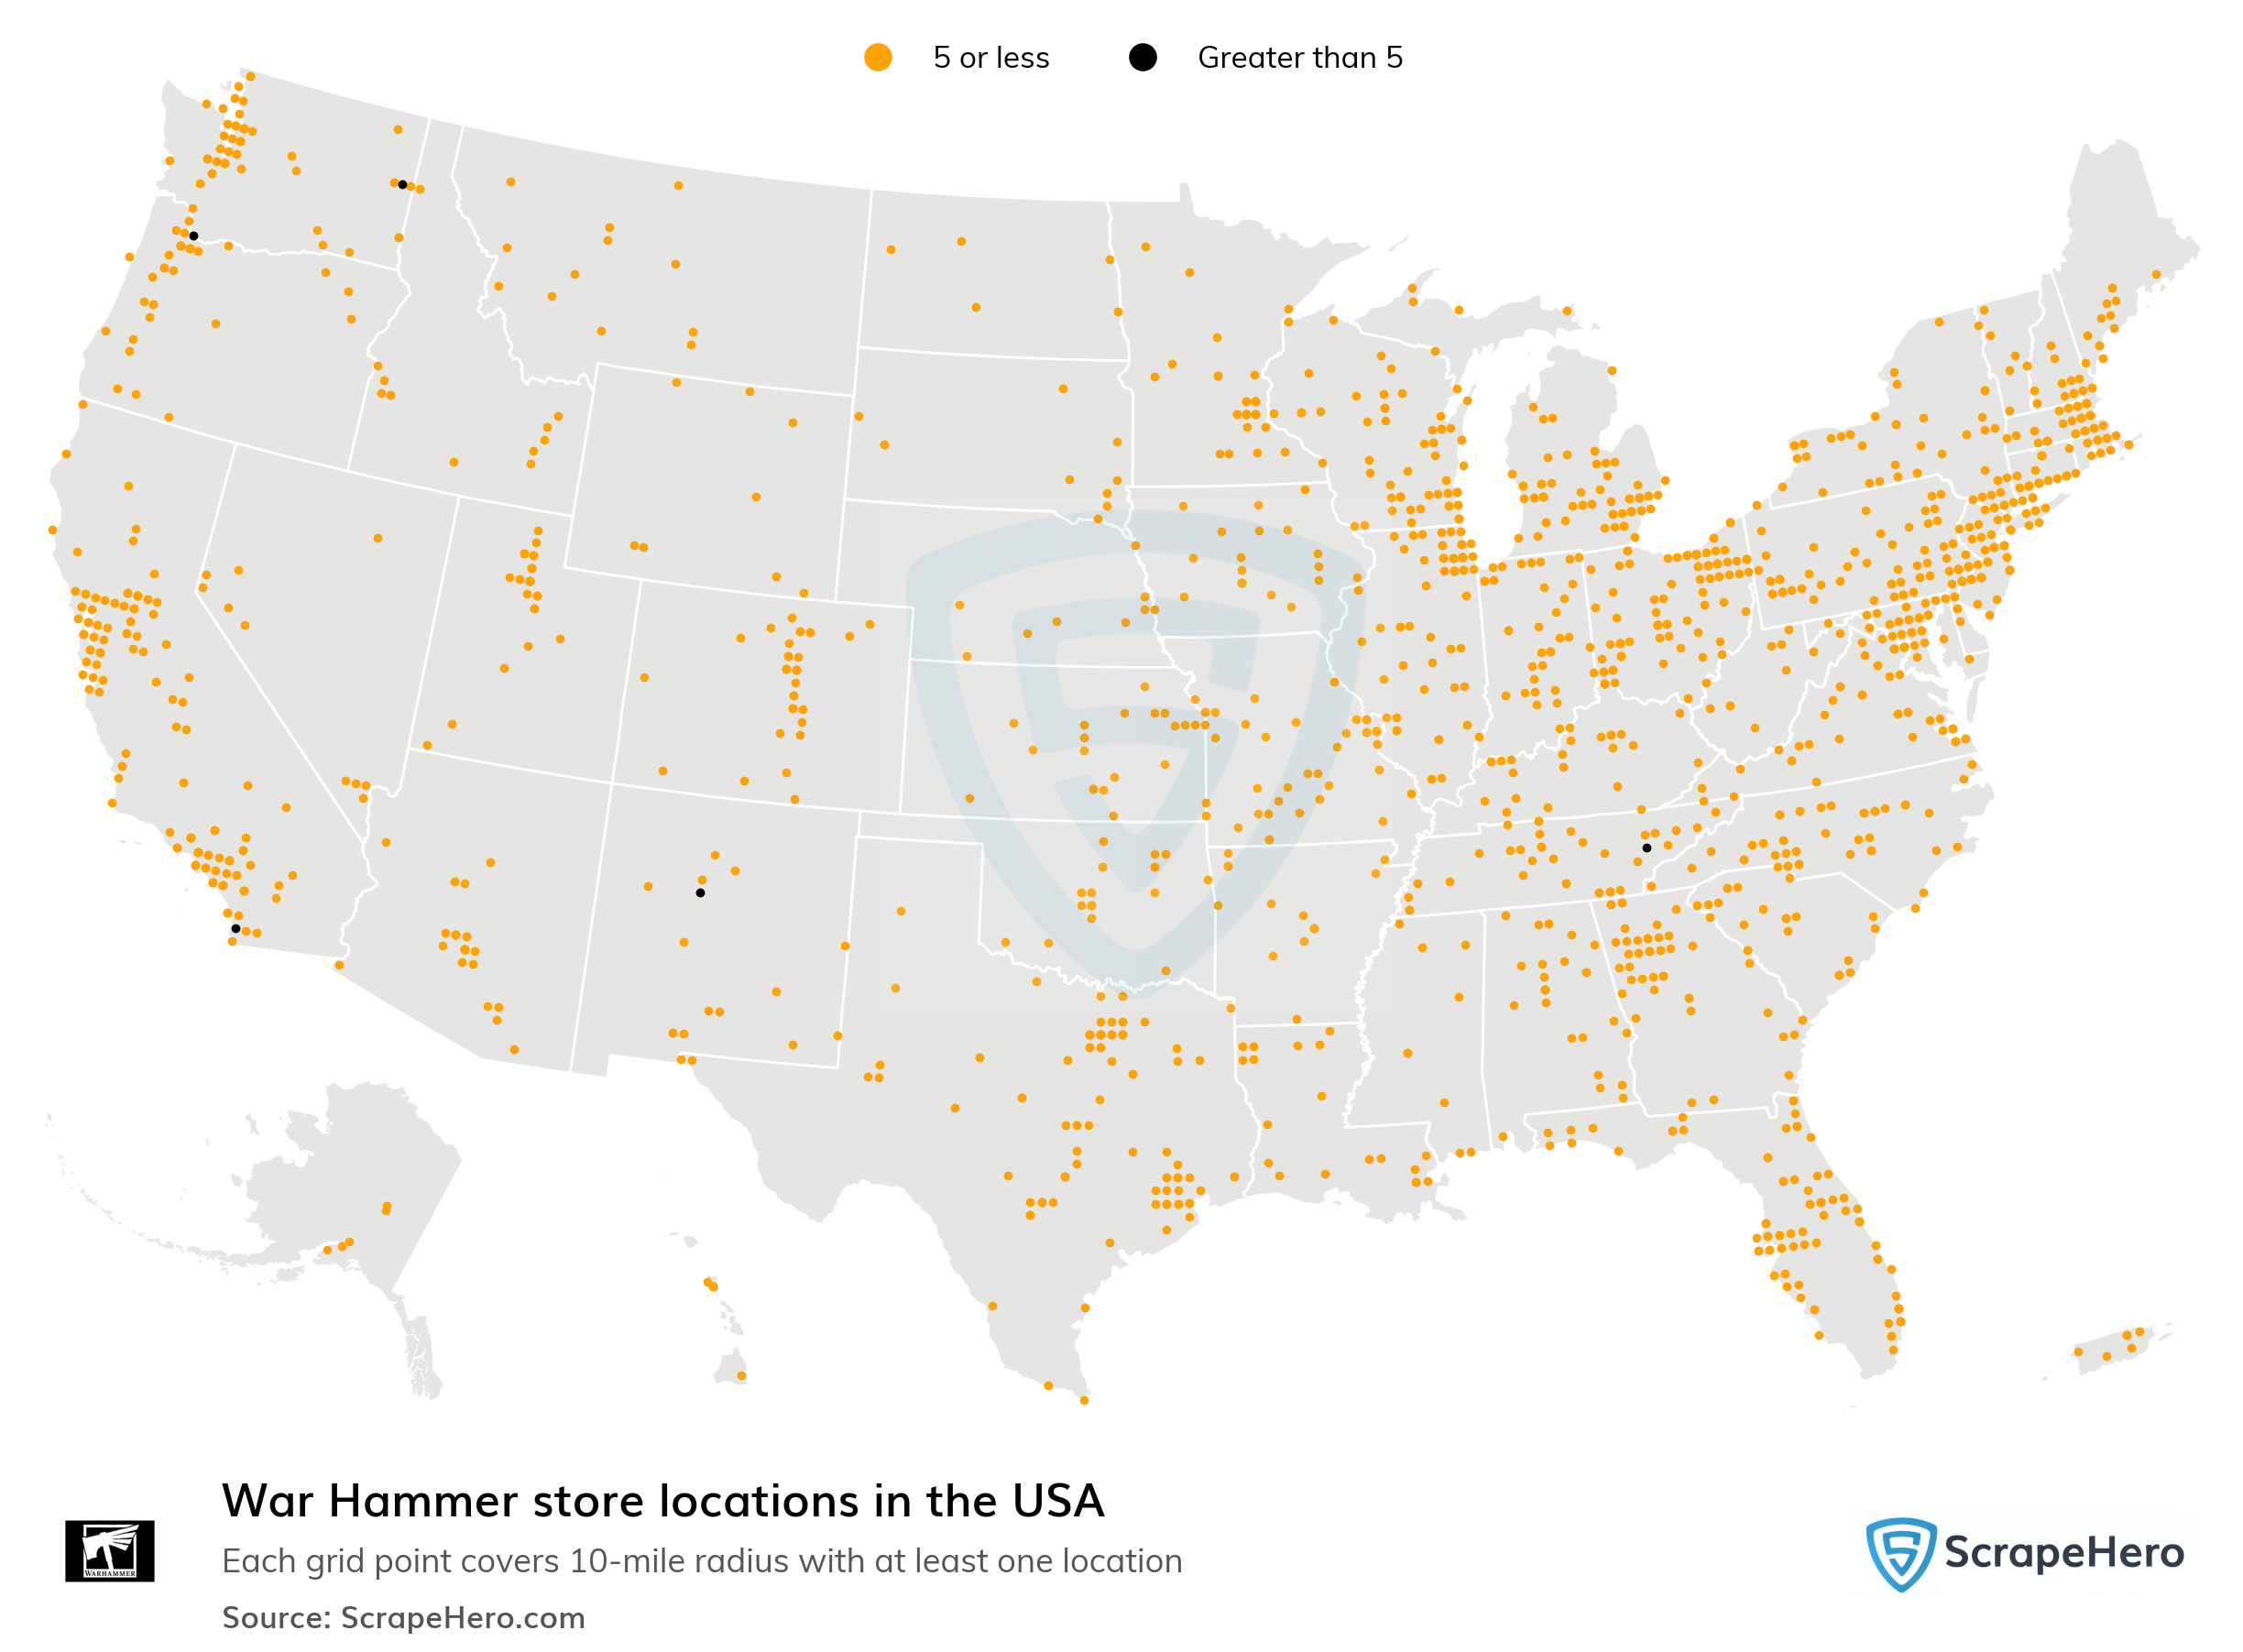 List of all War Hammer store locations in the USA - ScrapeHero Data Store